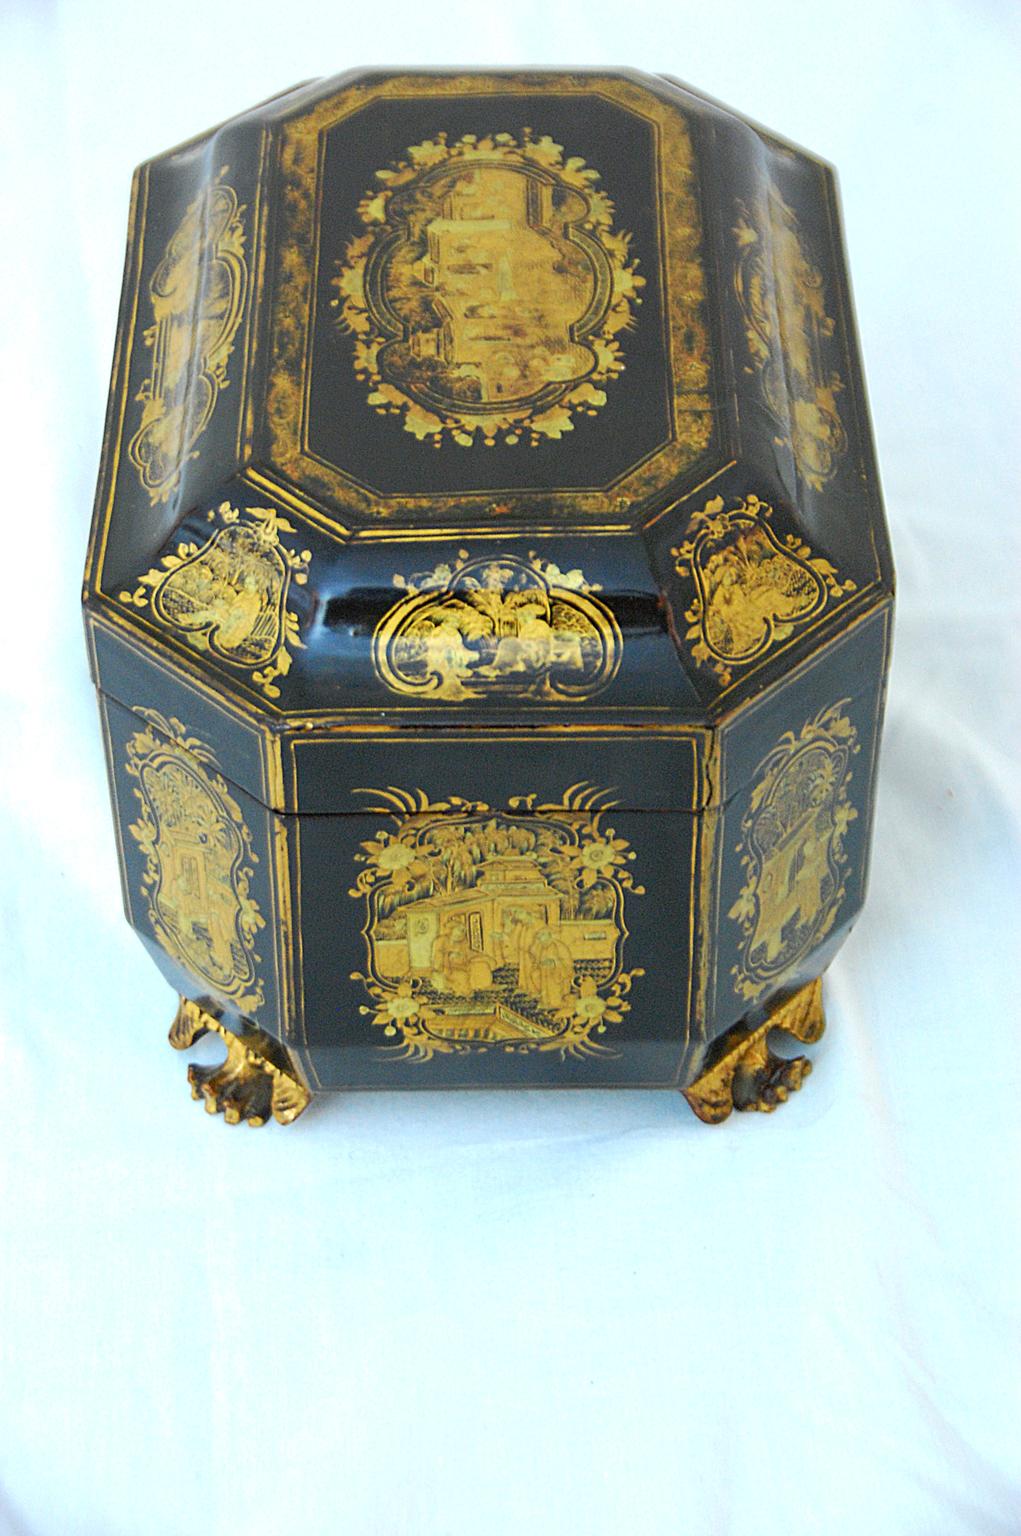 Chinese export lacquered hand painted octagonal chinoiserie teacaddy , black with gold decoration. The interior has two hand engraved pewter tea boxes, each with double lids to keep the tea fresh. This fine teacaddy has hand carved feet, ogee shaped